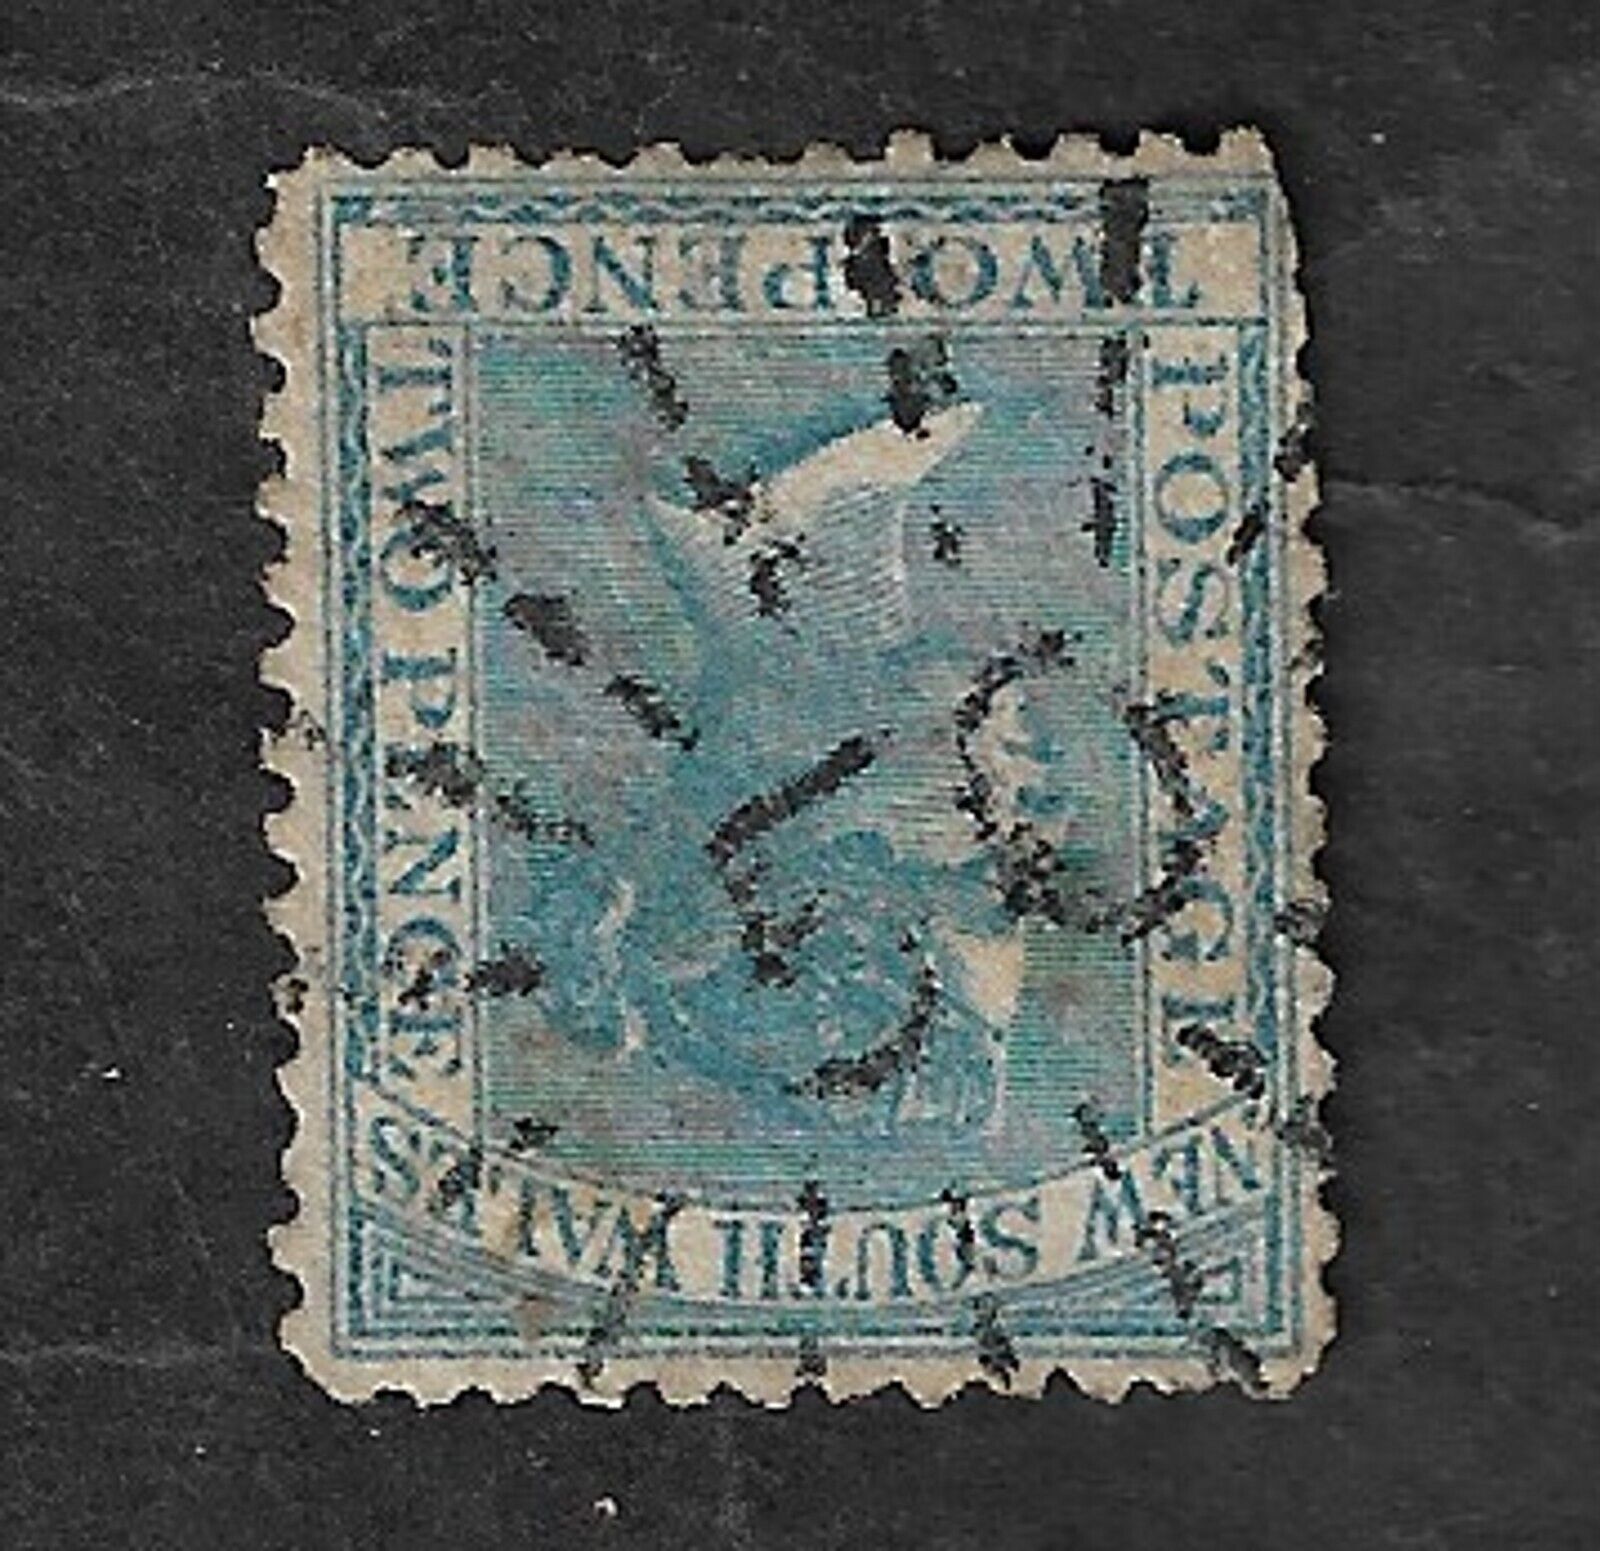 Nsw Numeral Cancel 50 (3r16) Rated Rrrr